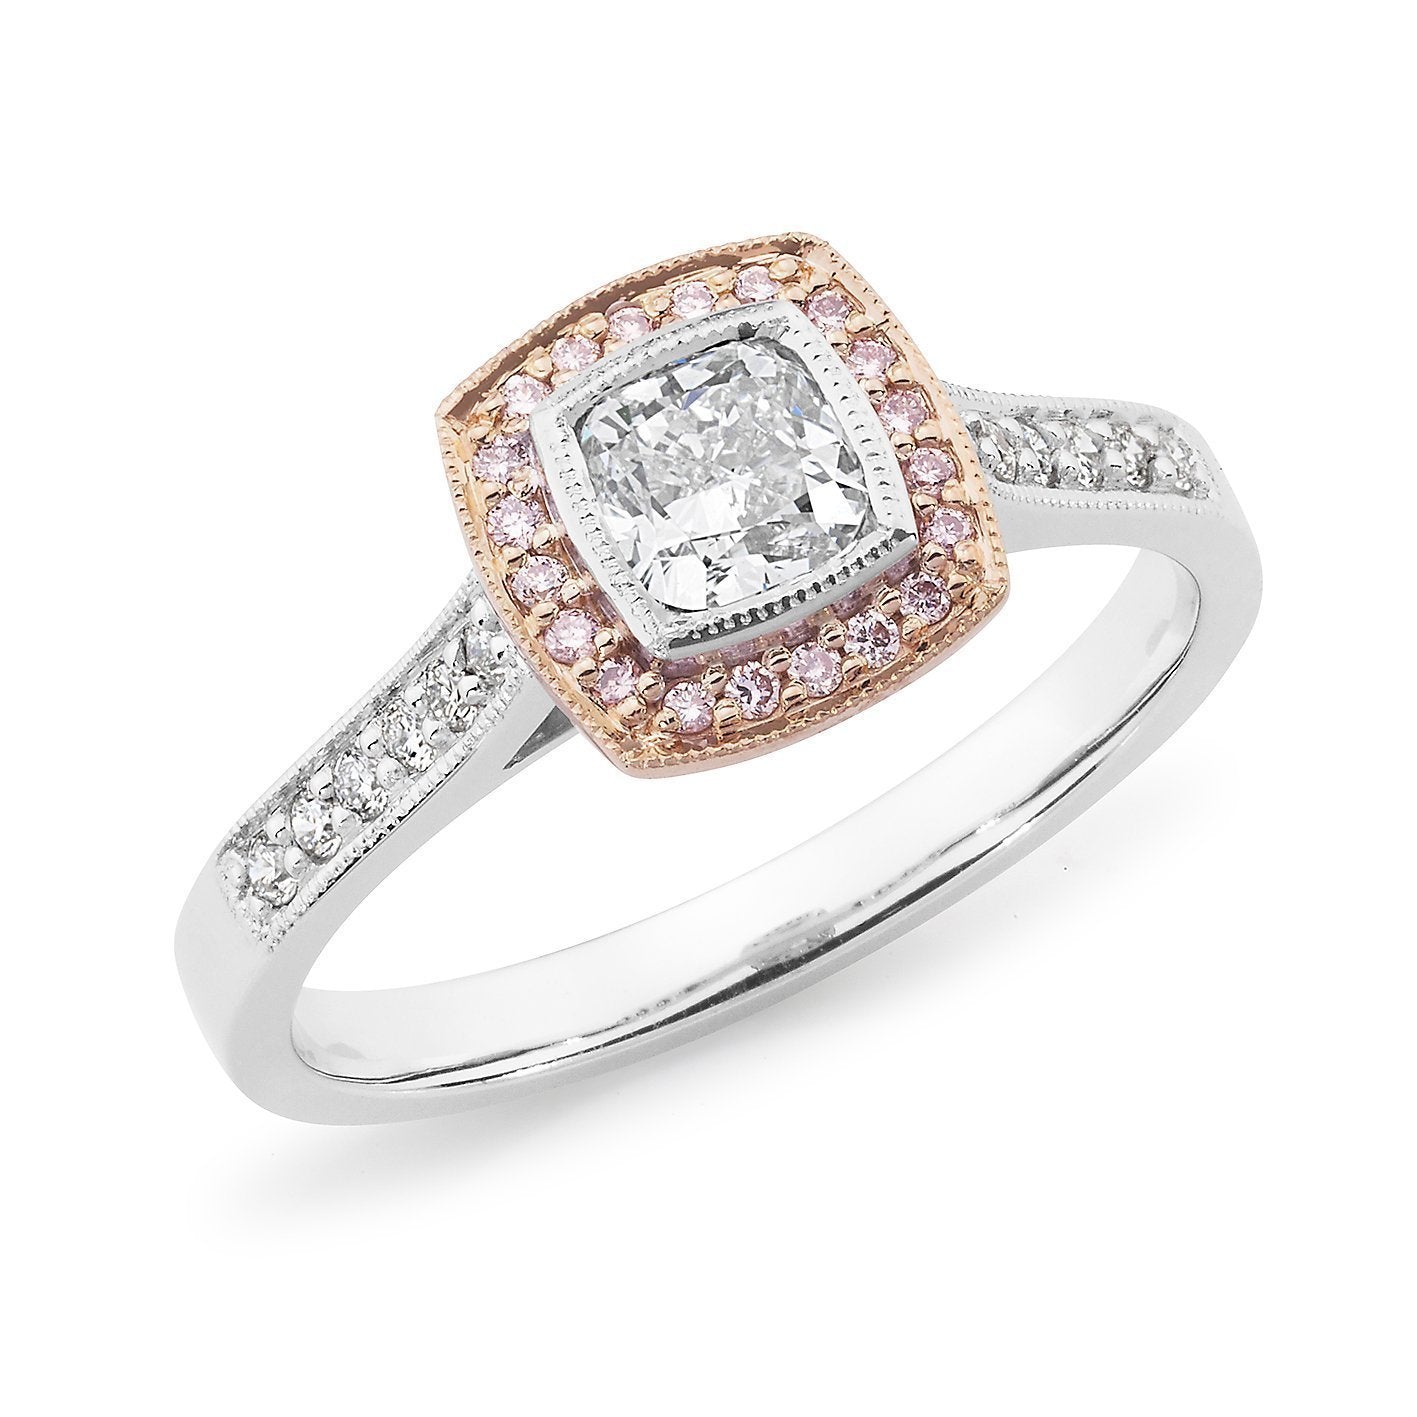 PINK CAVIAR 0.72ct White Cushion Cut & Pink Diamond Halo Engagement Ring in 18ct White Gold